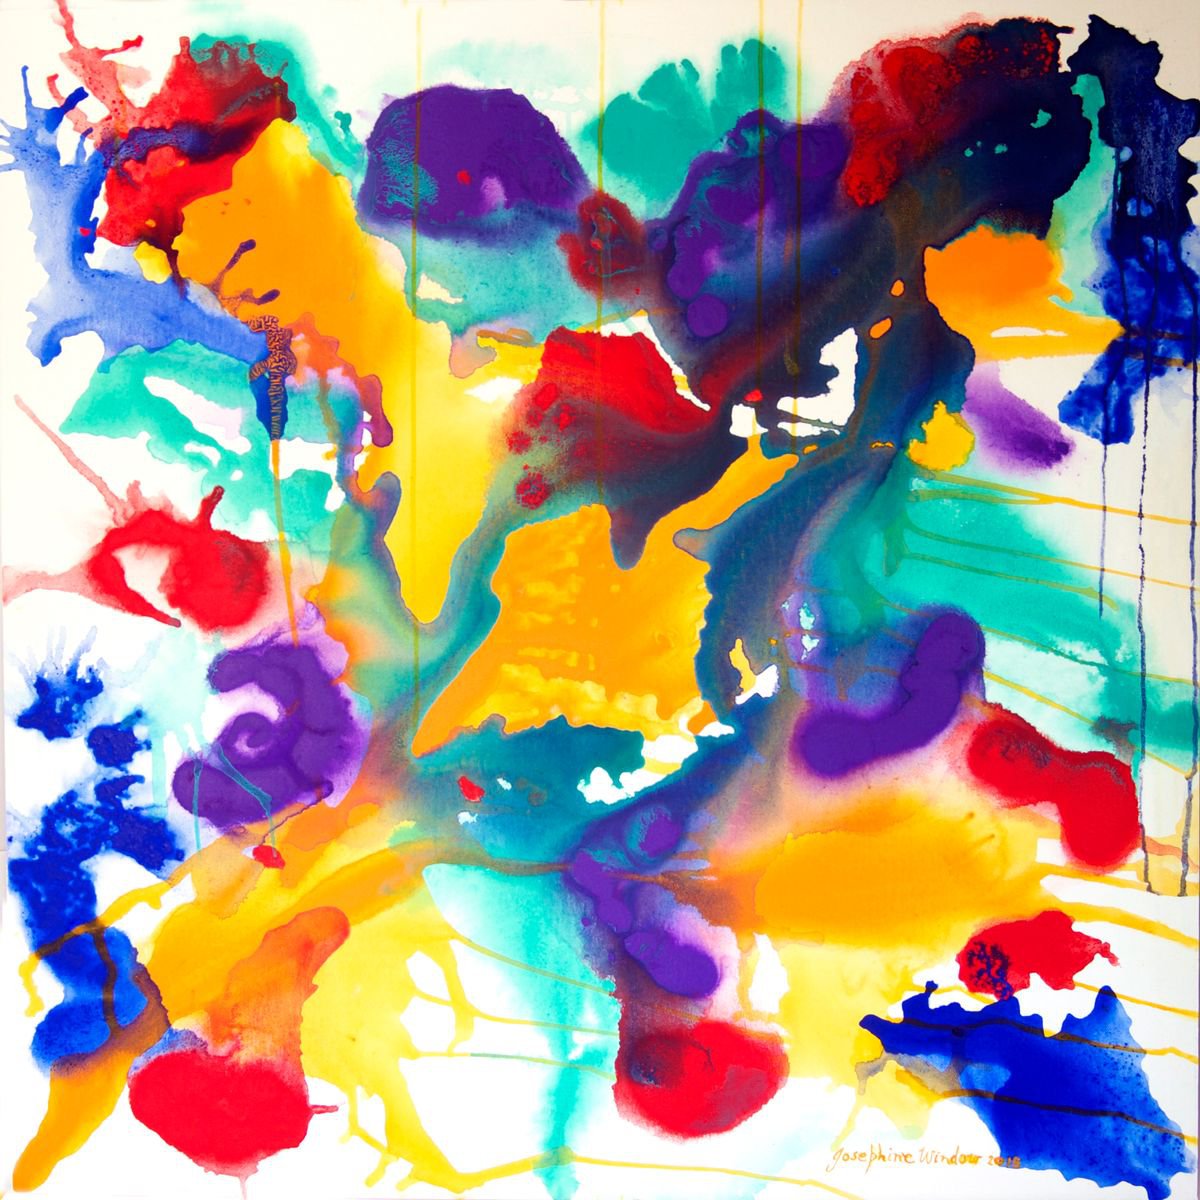 Fluidity Dance #2 X-Large Abstract Painting 110cm x 110cm (43 1/2 inches x 43 1/2 inches) by Josephine Window